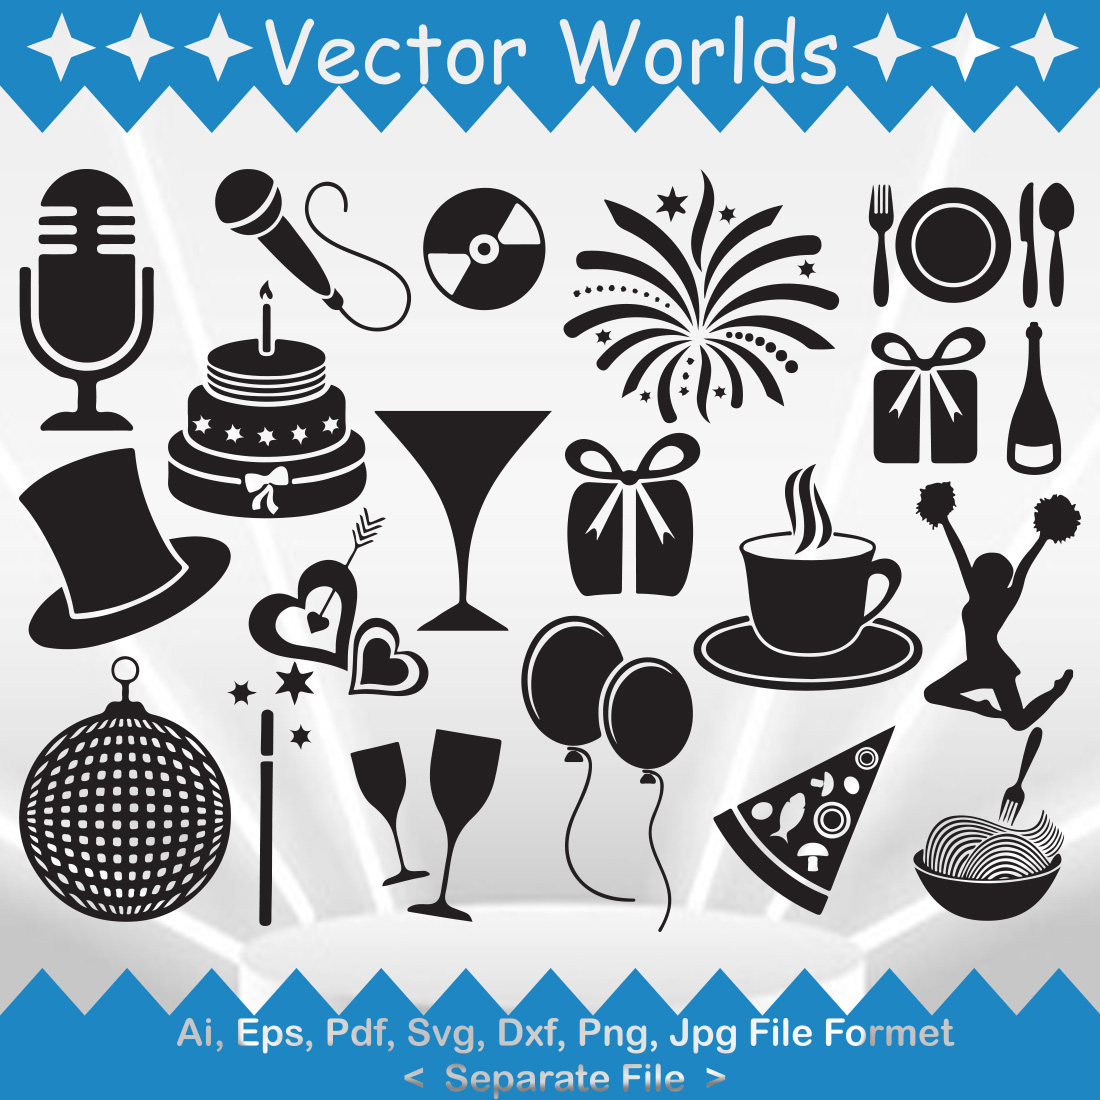 Party SVG Vector Design cover image.